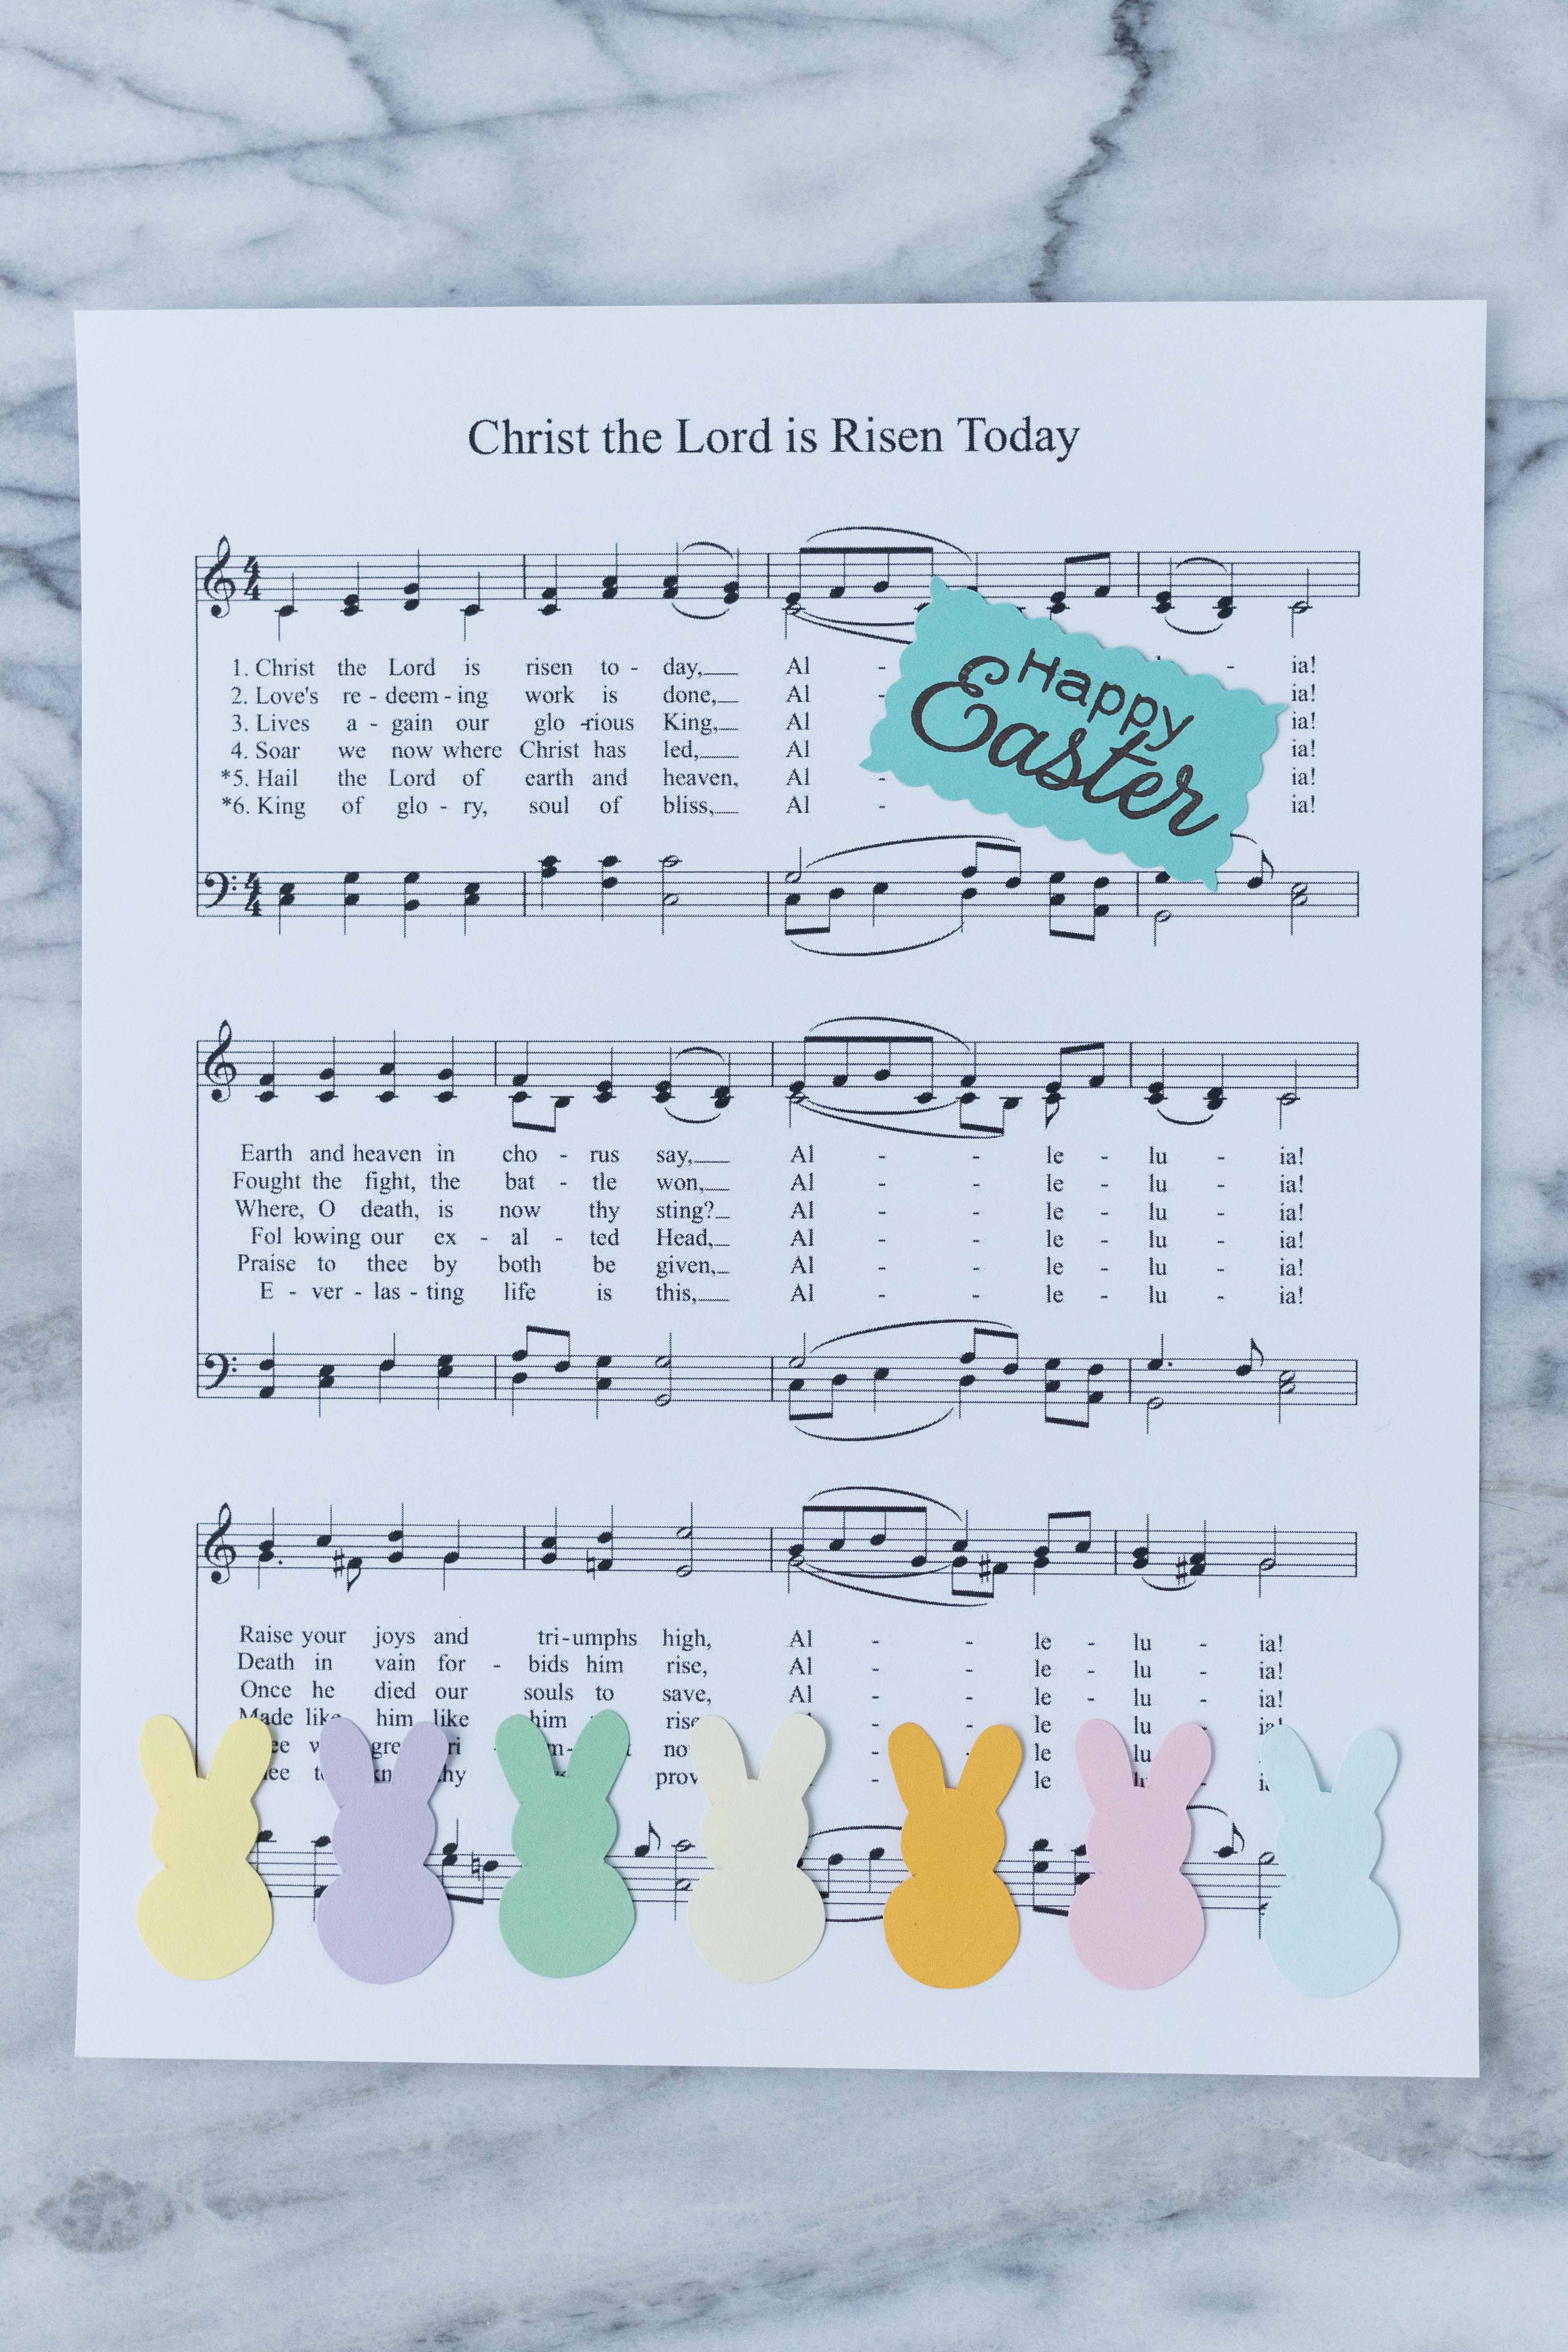 Putting together "Christ the Lord is Risen Today" Easter sheet music decor with pastel bunnies. #Easter #DIY #pastel | https://www.roseclearfield.com